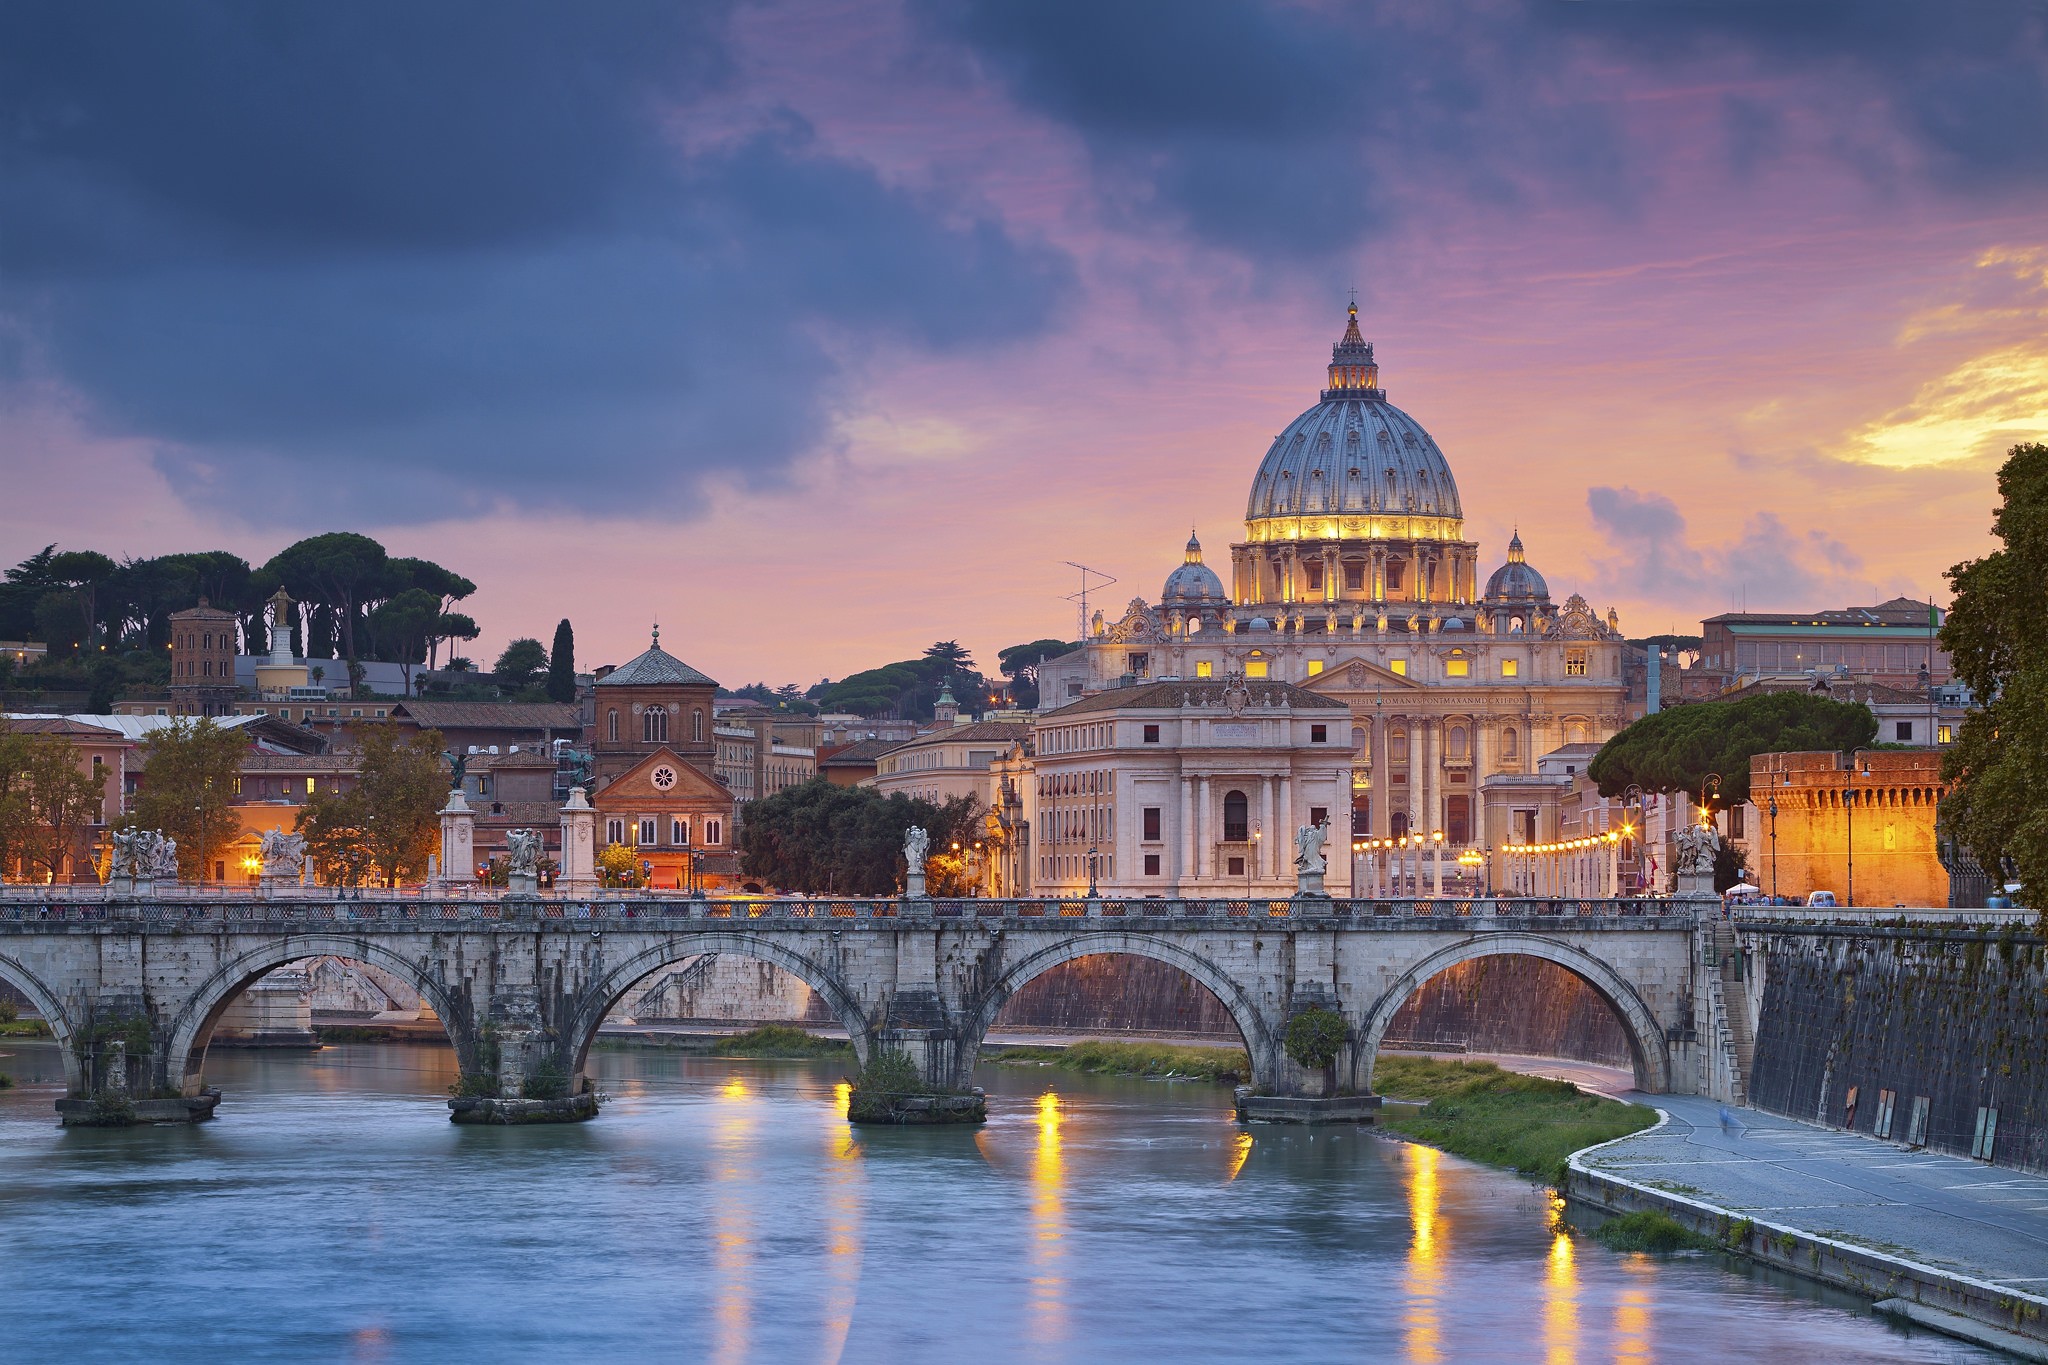 rome-italy-vatican-city-cathedral-church-river-bridge-evening